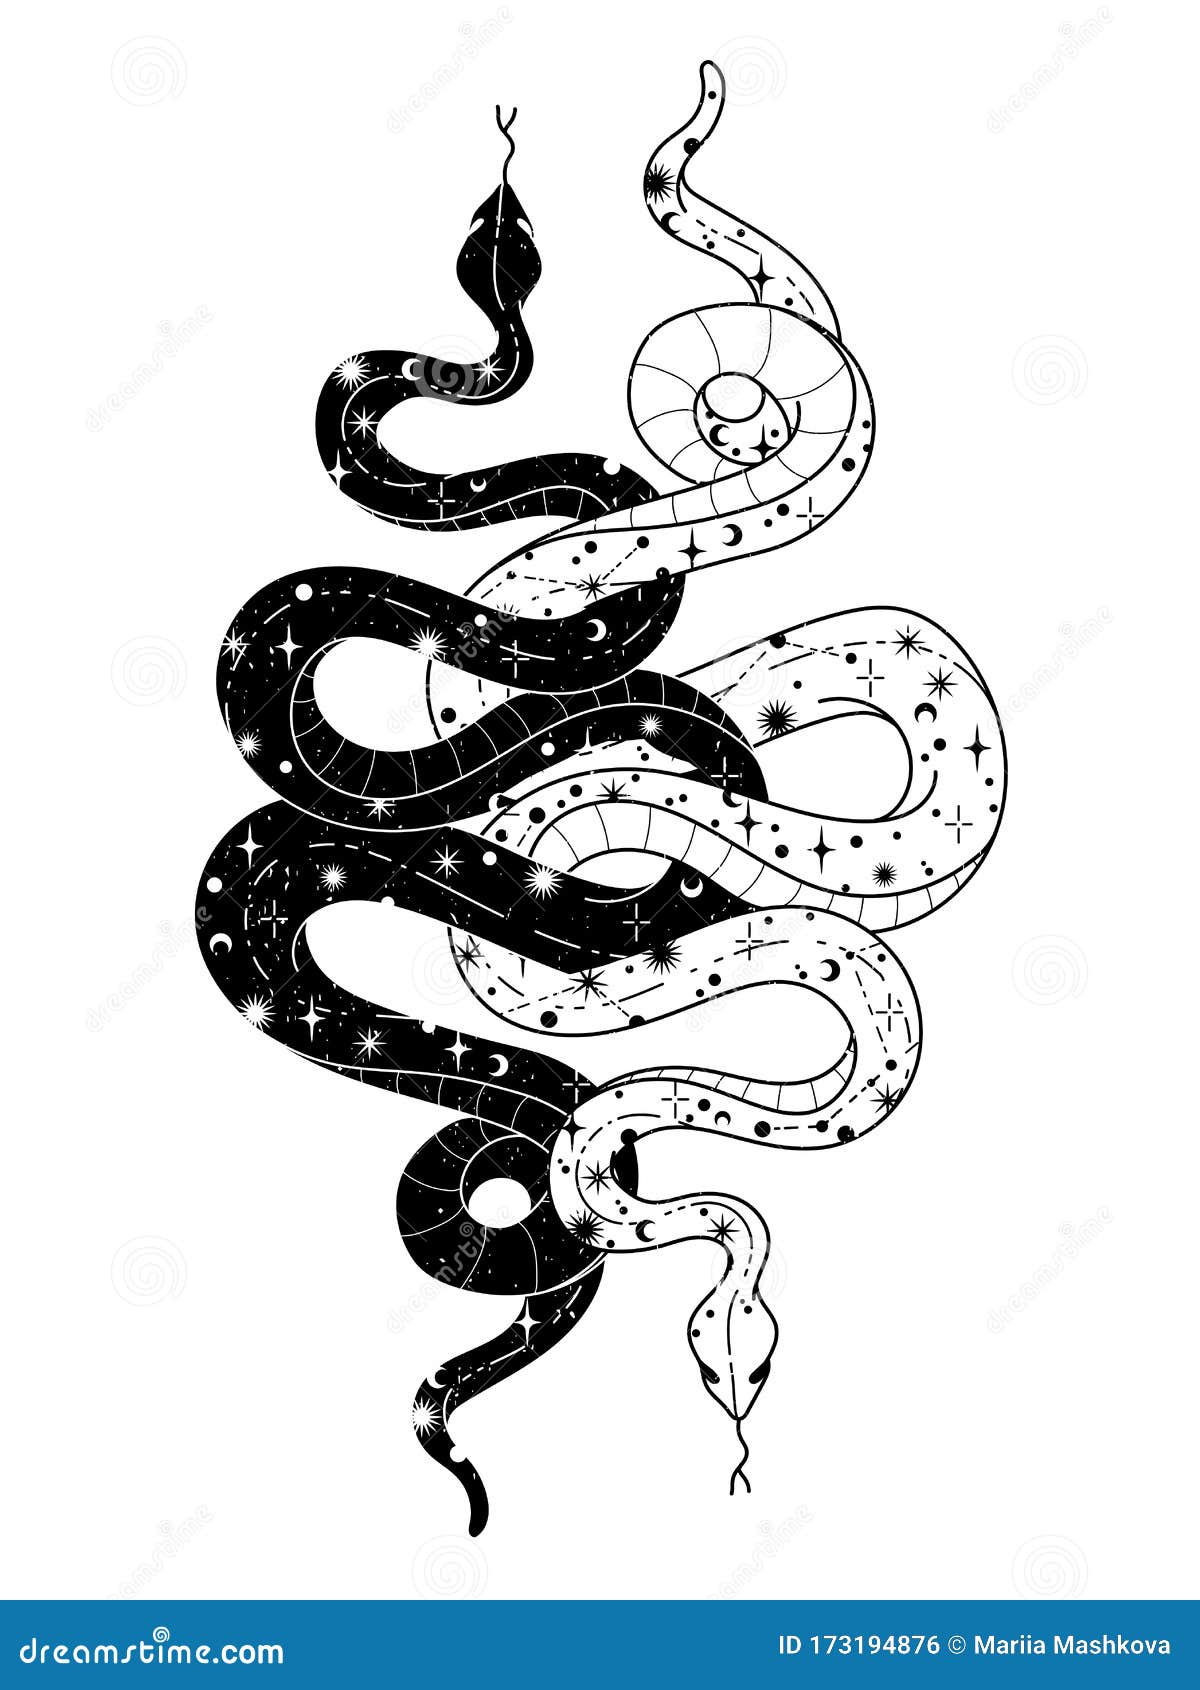 occult trendy hand drawn  with snake, moon and stars.